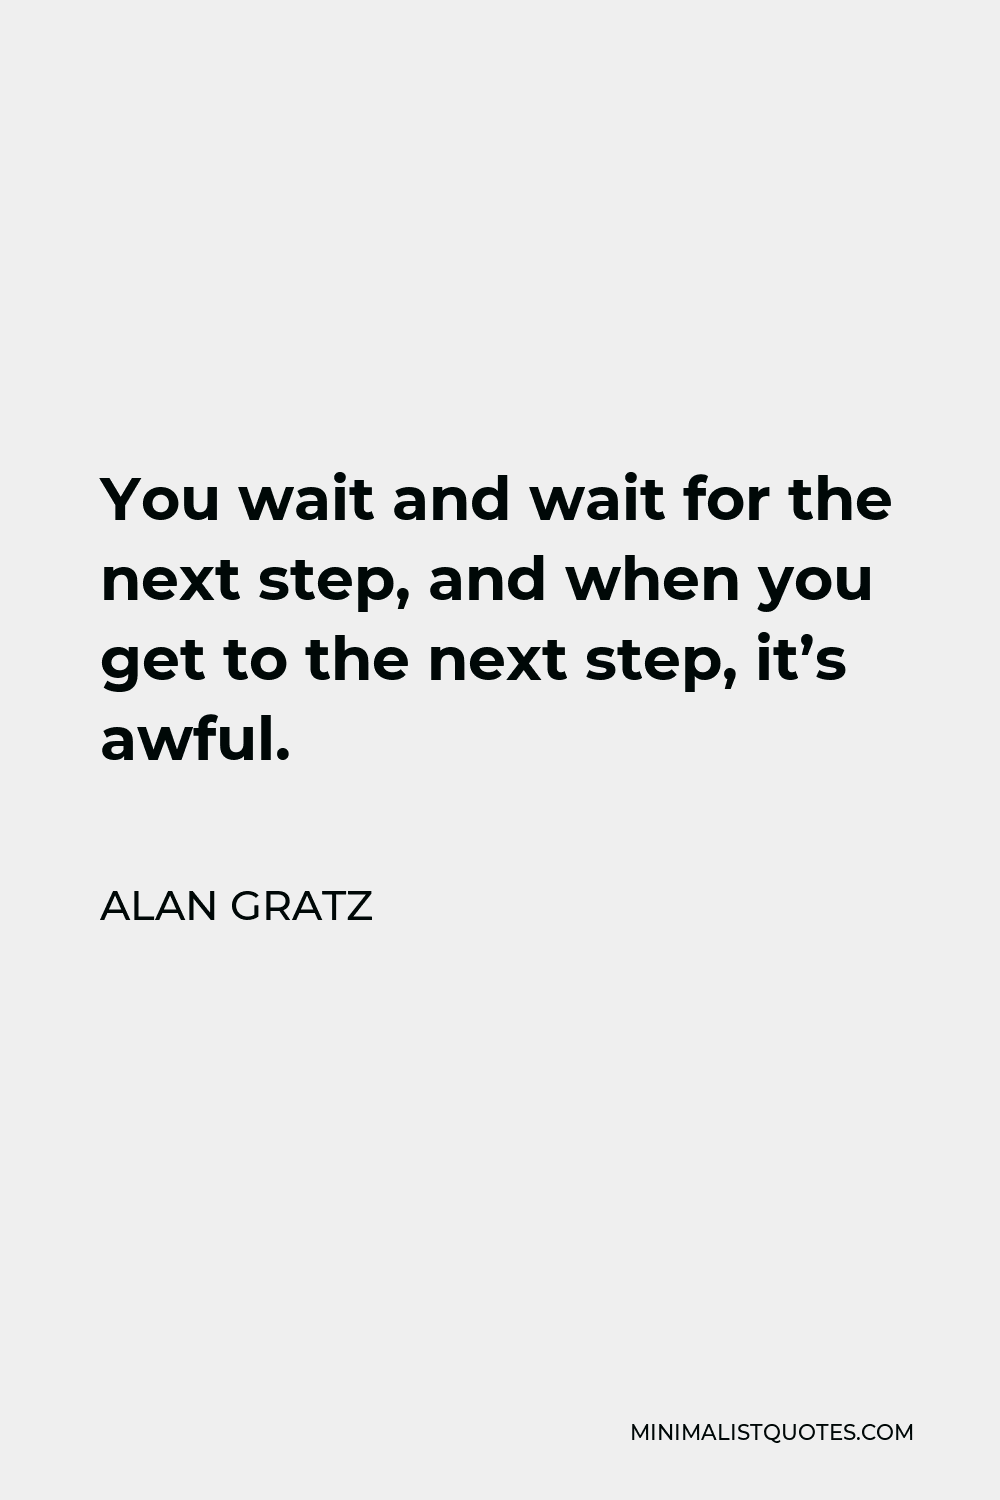 Alan Gratz Quote - You wait and wait for the next step, and when you get to the next step, it’s awful.